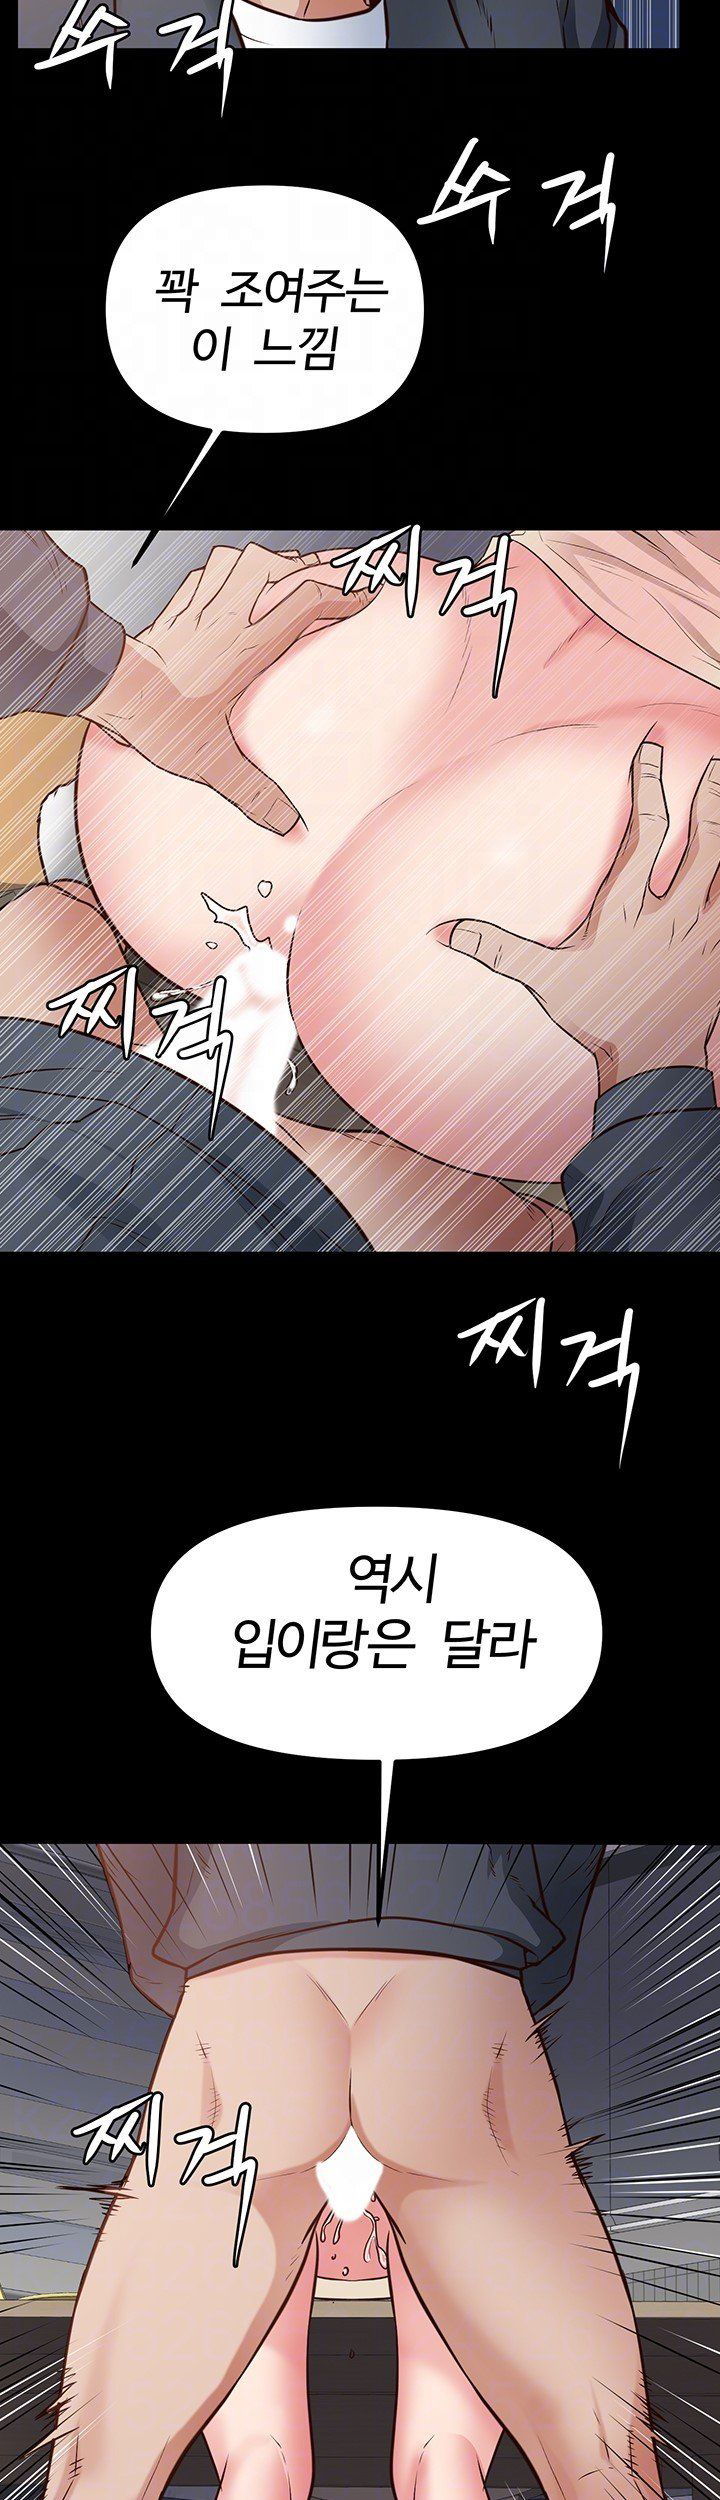 bs-anger-raw-chap-3-6